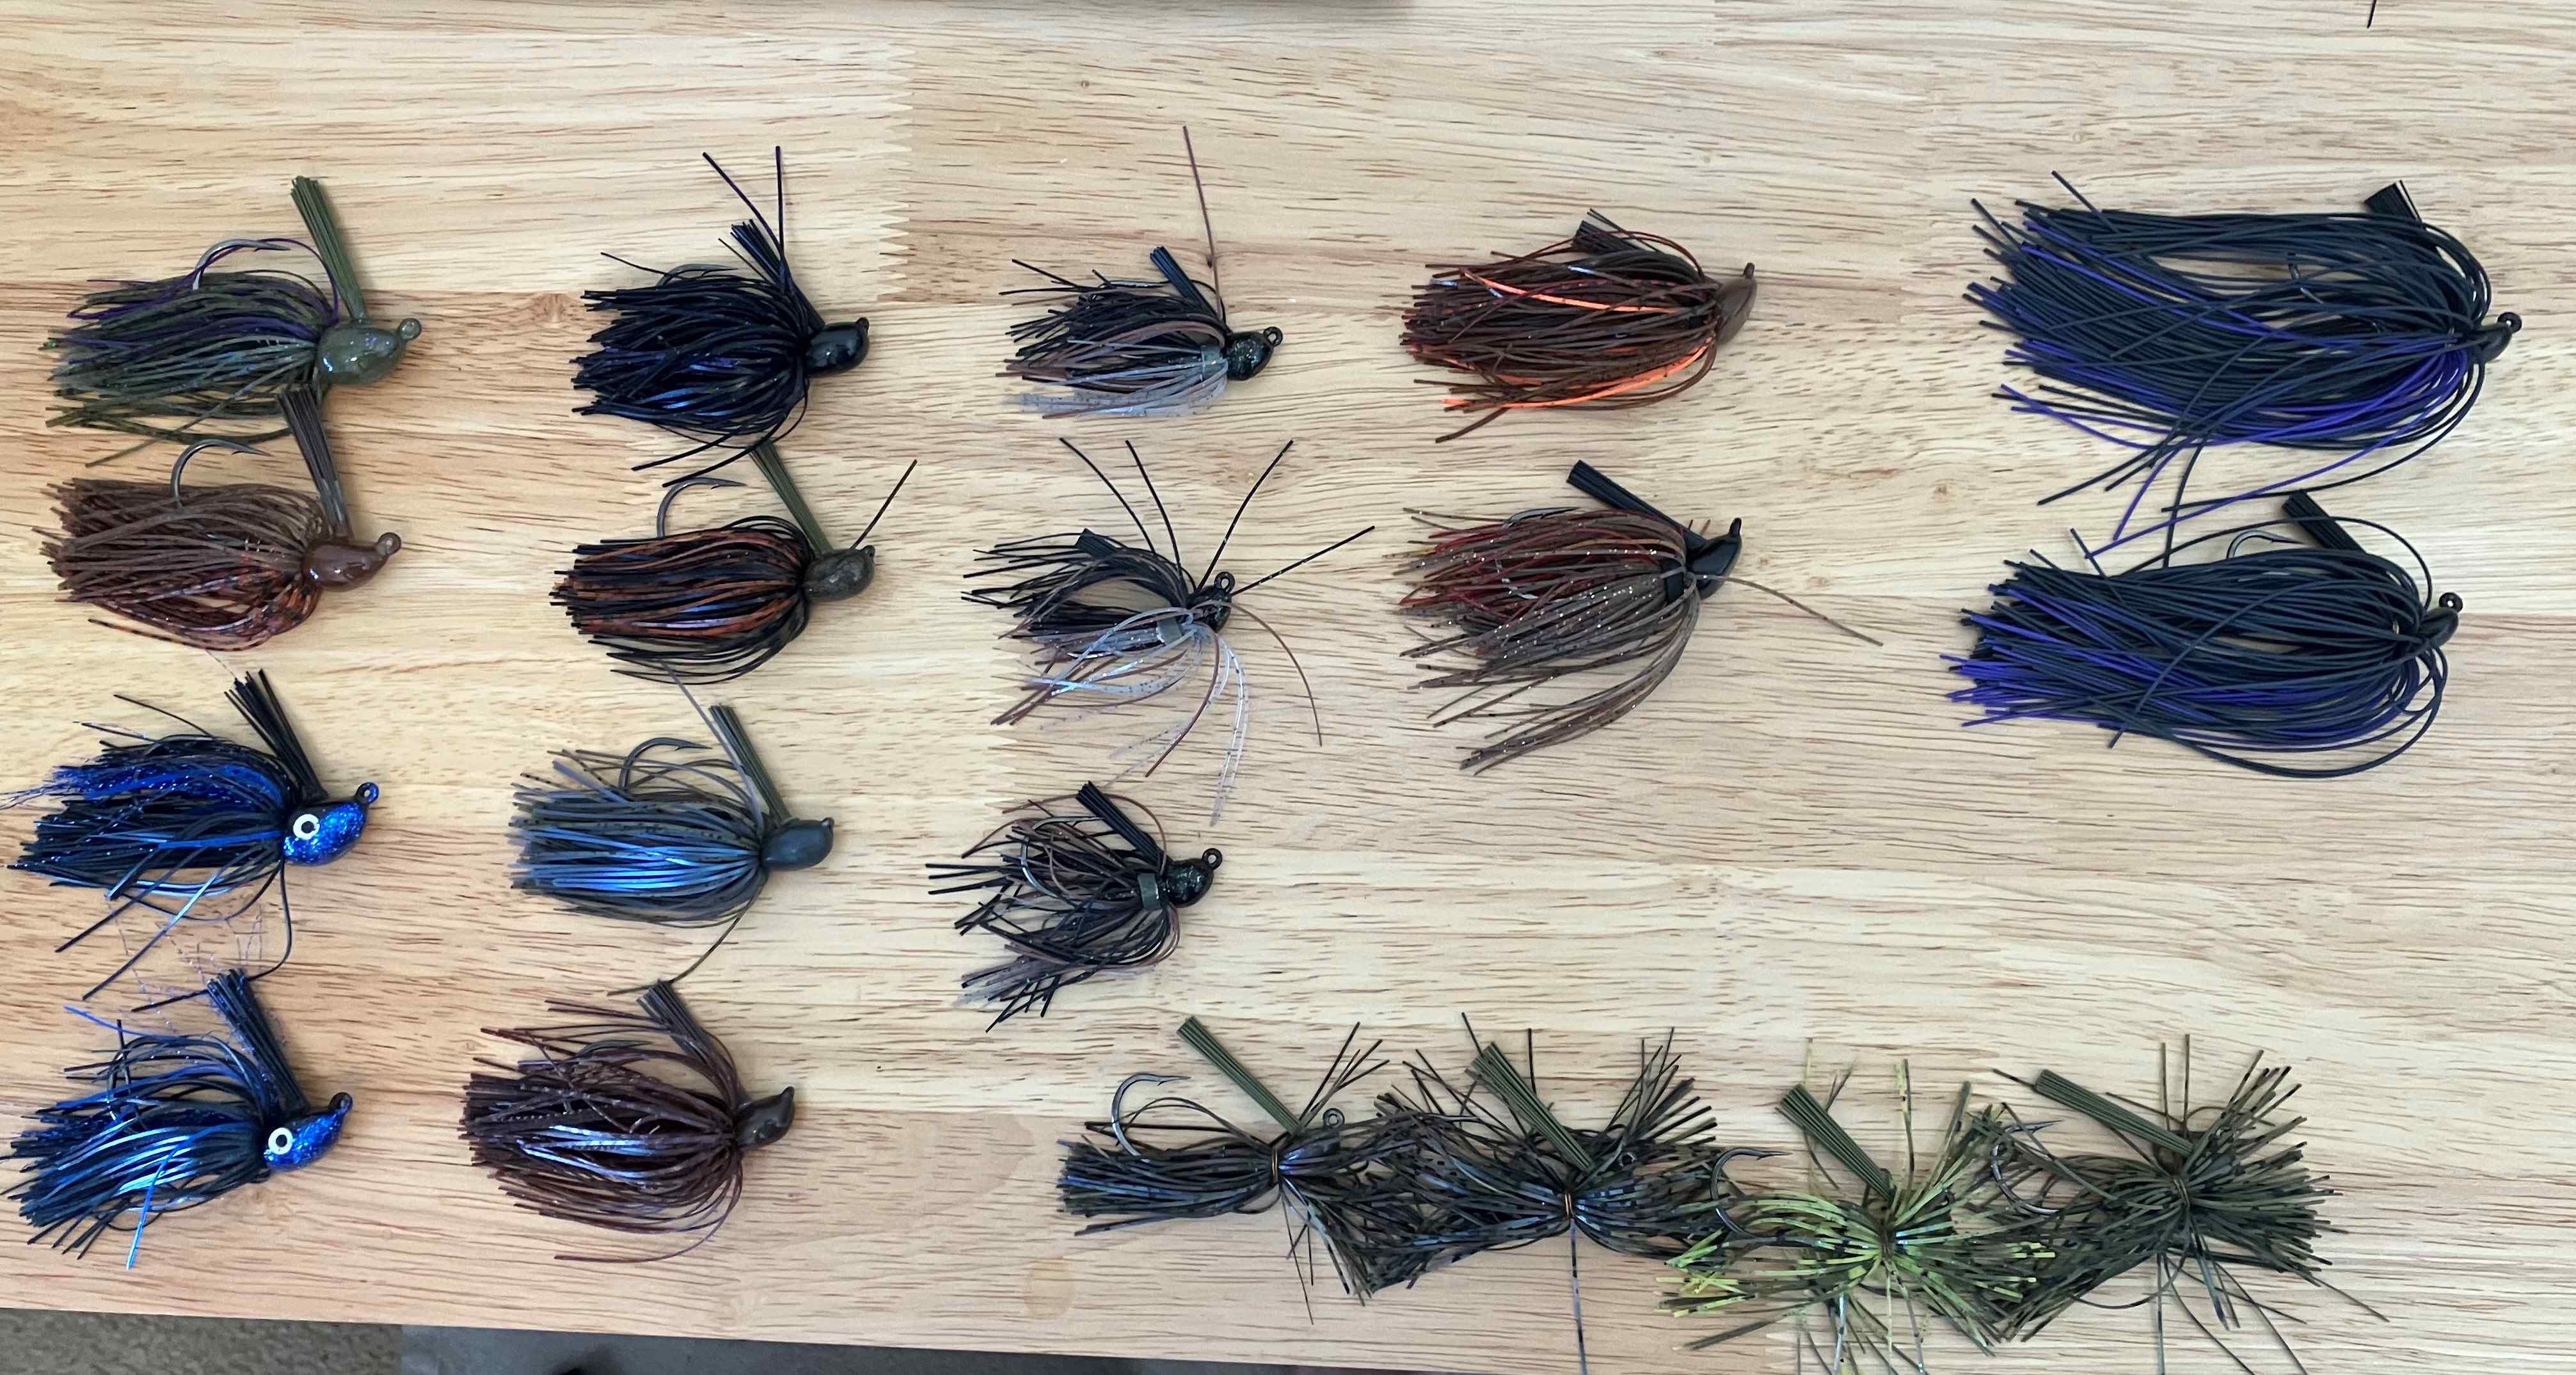 Share Your Favorite Jigs - Fishing Tackle - Bass Fishing Forums